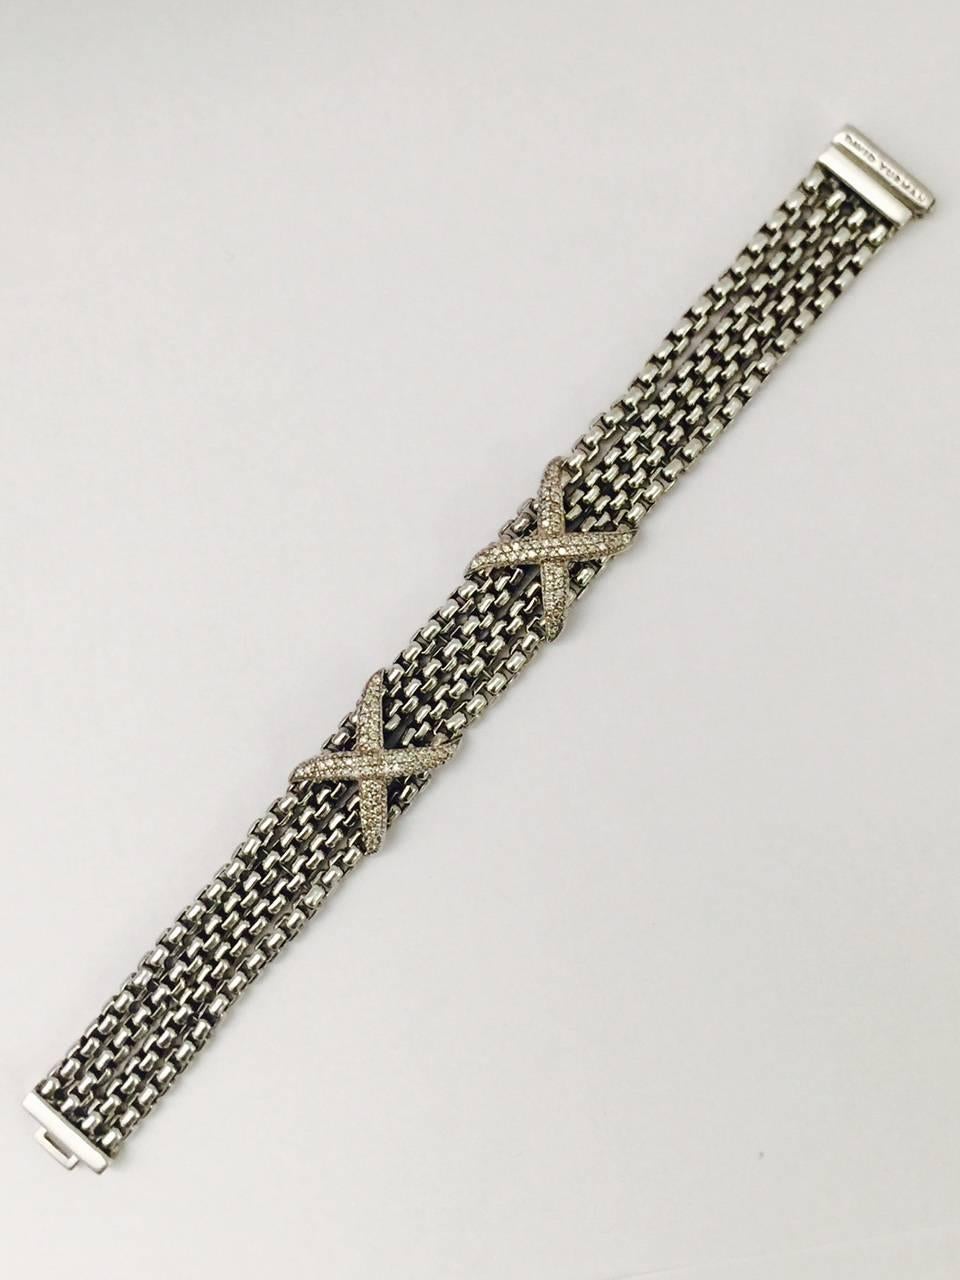 David Yurman was the first major designer to set diamonds in Sterling Silver, revolutionizing the world of Fine Jewelry!  This stunning four row box chain bracelet is adorned with two diamond pave X's.  Kiss!  Kiss!  Approximate total weight of